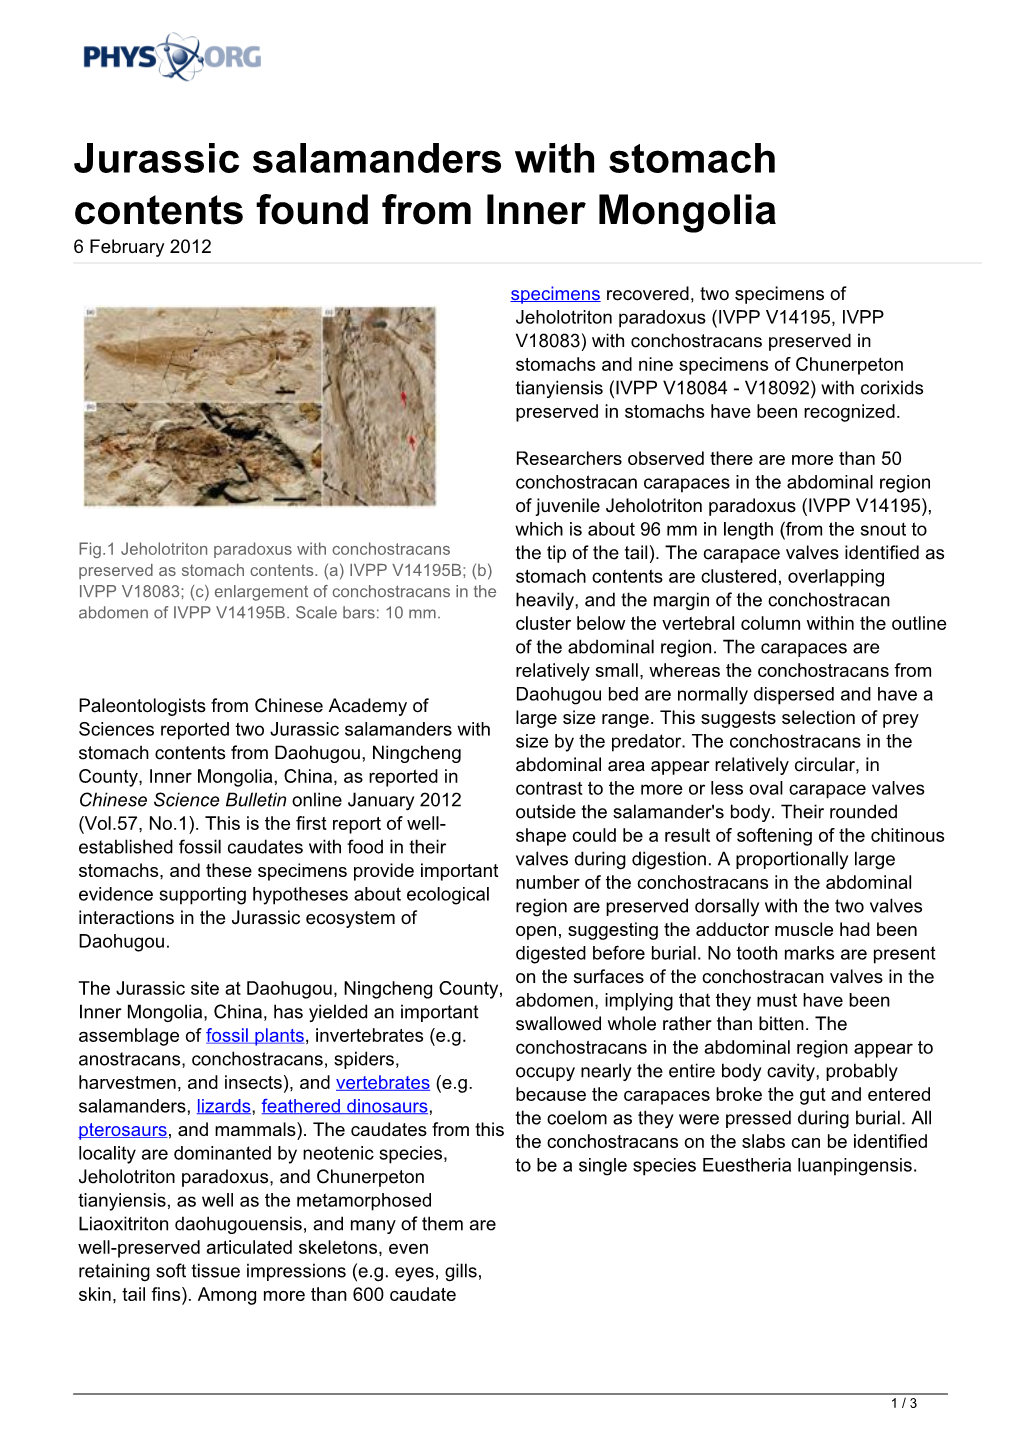 Jurassic Salamanders with Stomach Contents Found from Inner Mongolia 6 February 2012